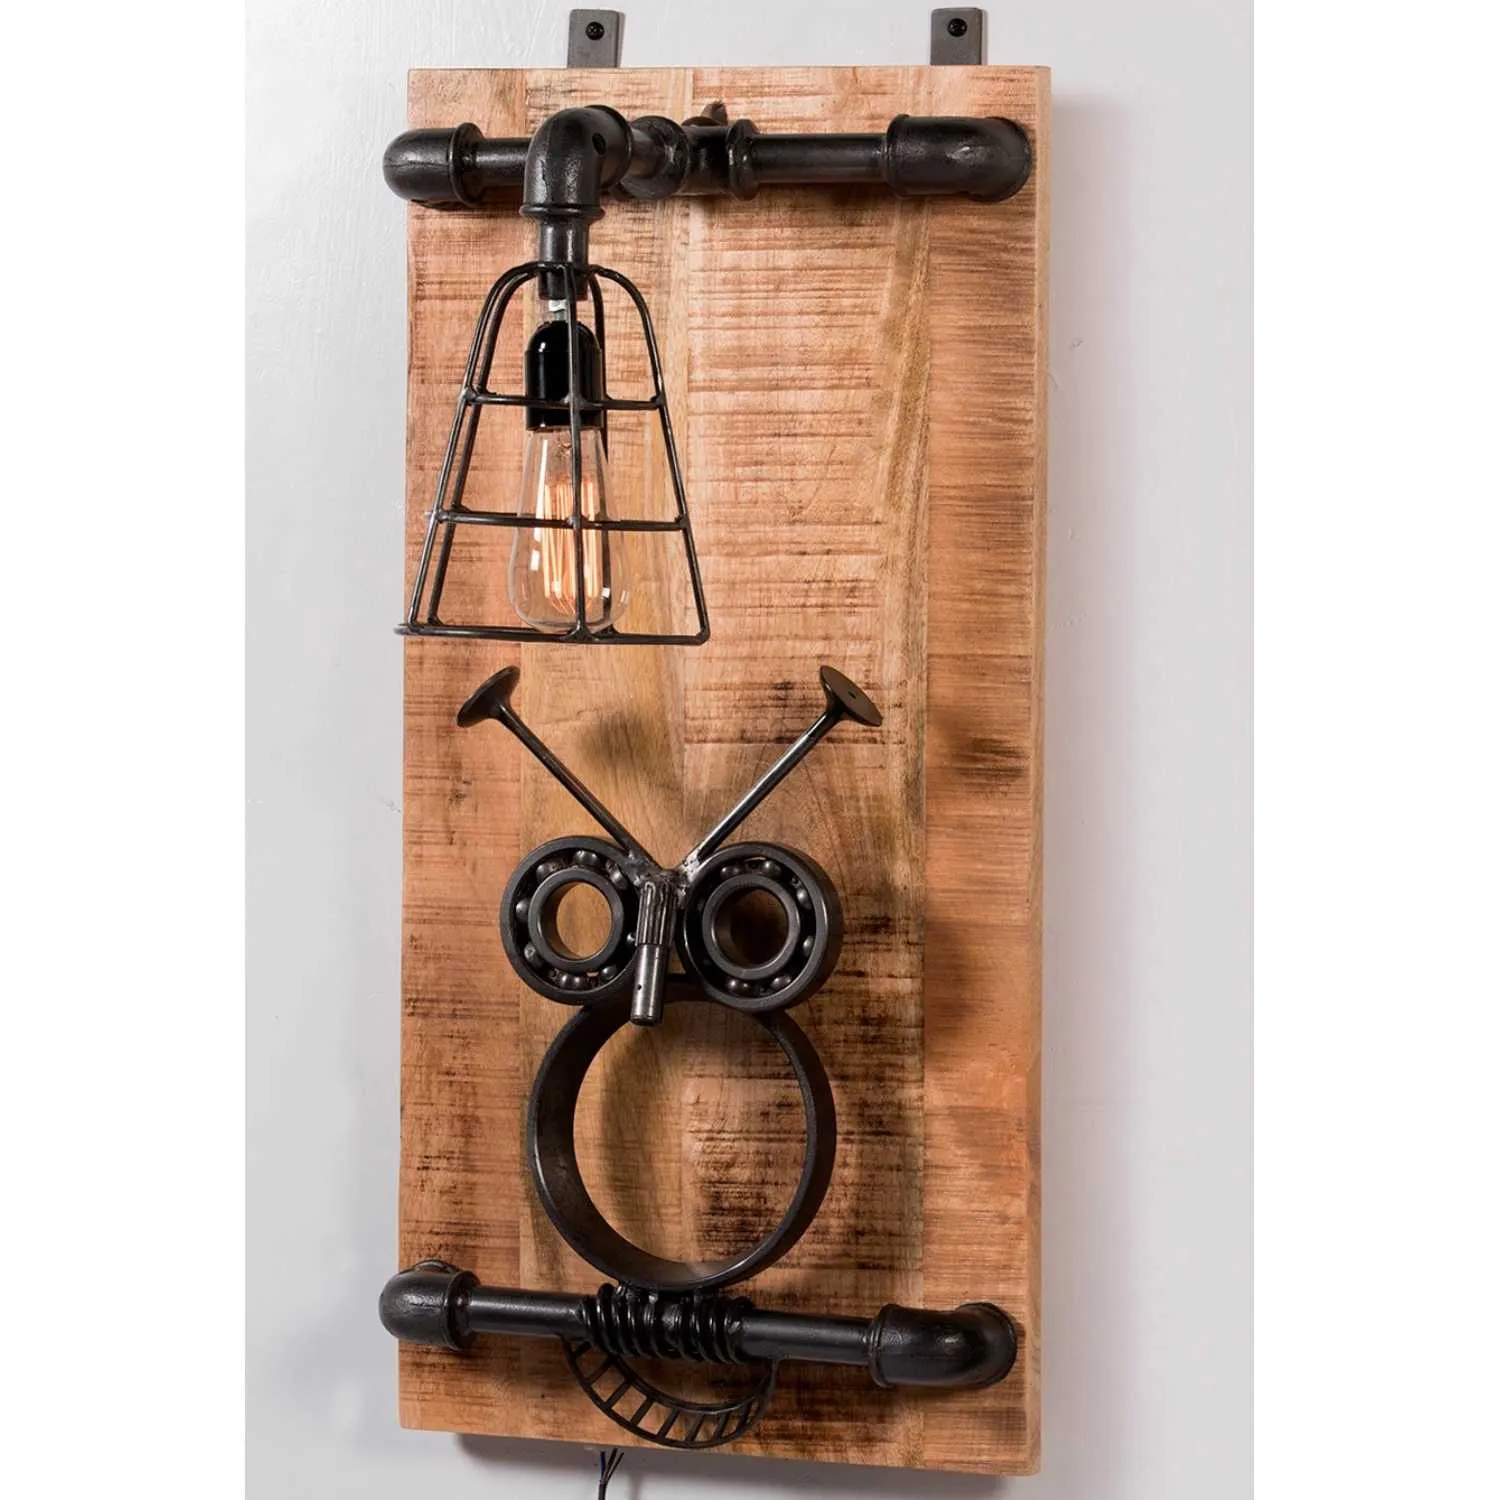 Upcycled Industrial Style Reclaimed Wood Black Owl Design Wall Mounted Lighting Lamp 37x30x74cm